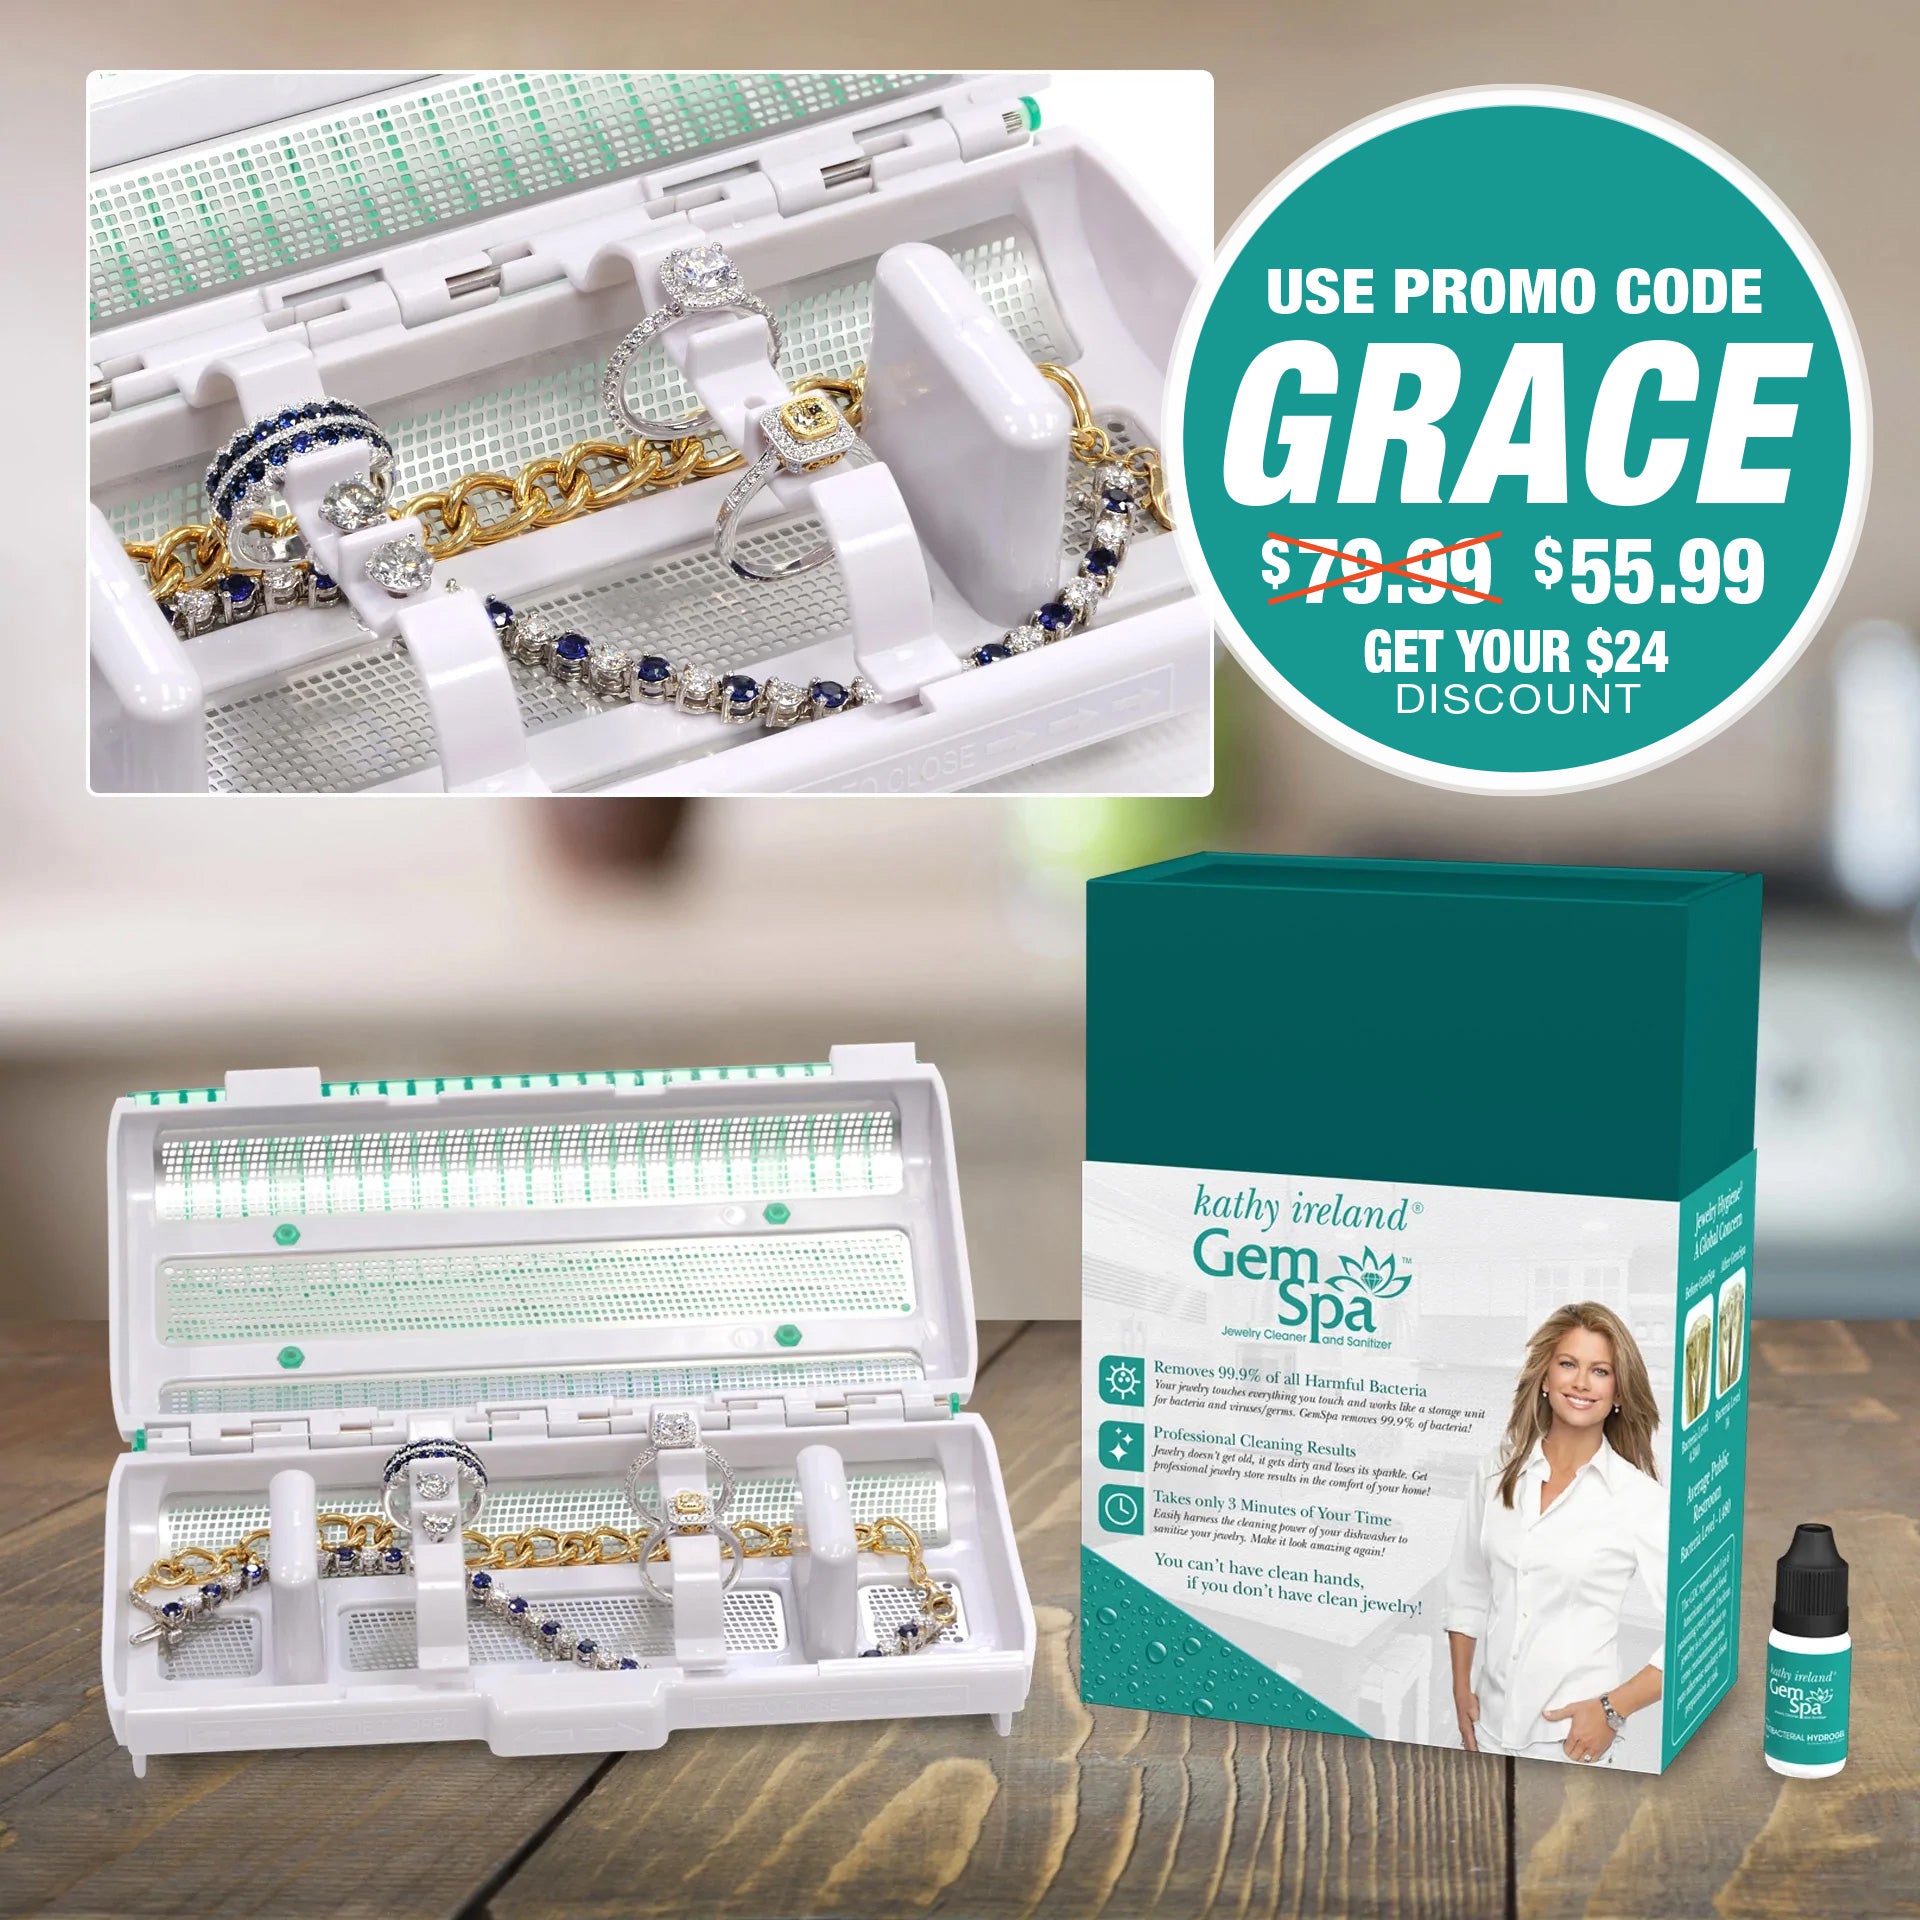 kathy ireland® GemSpa - Easy Home Jewelry Cleaner and Sanitizing System (The Howie Carr Show)